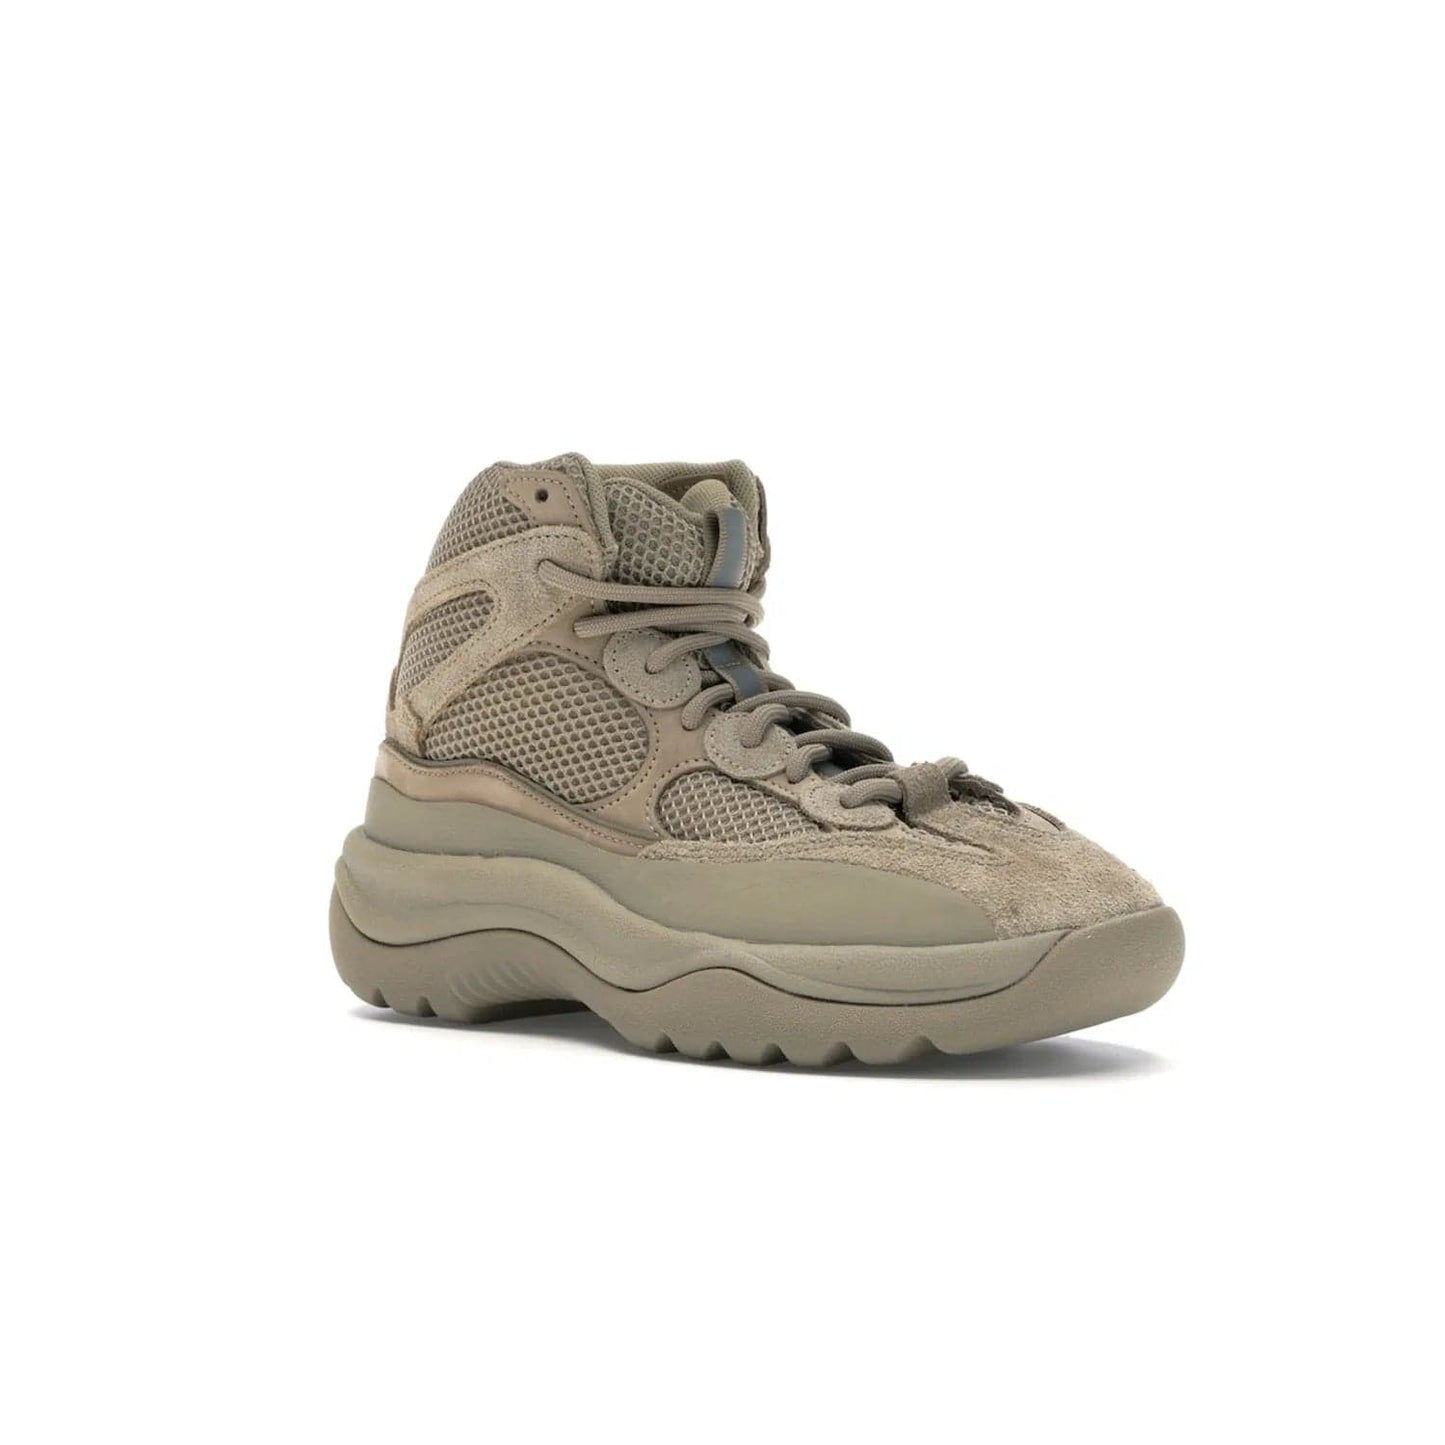 adidas Yeezy Desert Boot Rock - Image 5 - Only at www.BallersClubKickz.com - #
This season, make a fashion statement with the adidas Yeezy Desert Boot Rock. Nubuck and suede upper offers tonal style while the grooved sole provides traction and stability. Get yours in April 2019.